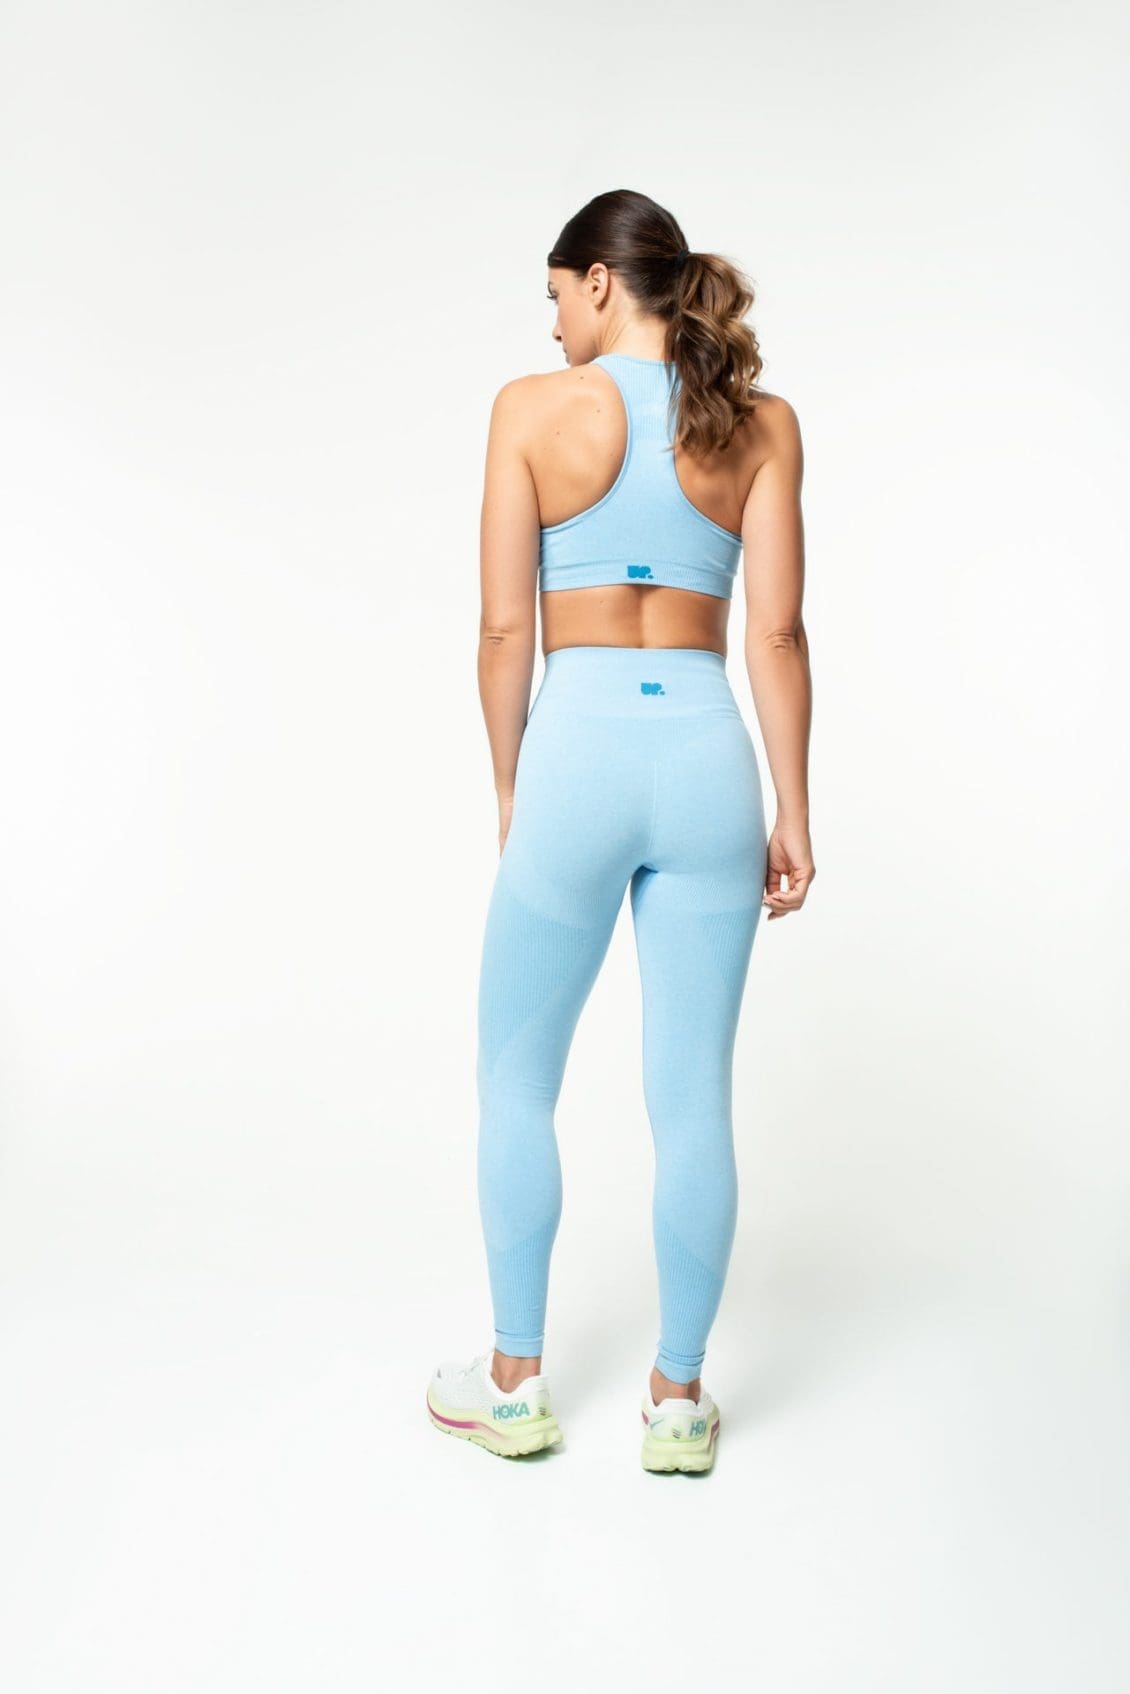 Gymshark 100% Cotton Athletic Sweat Pants for Women